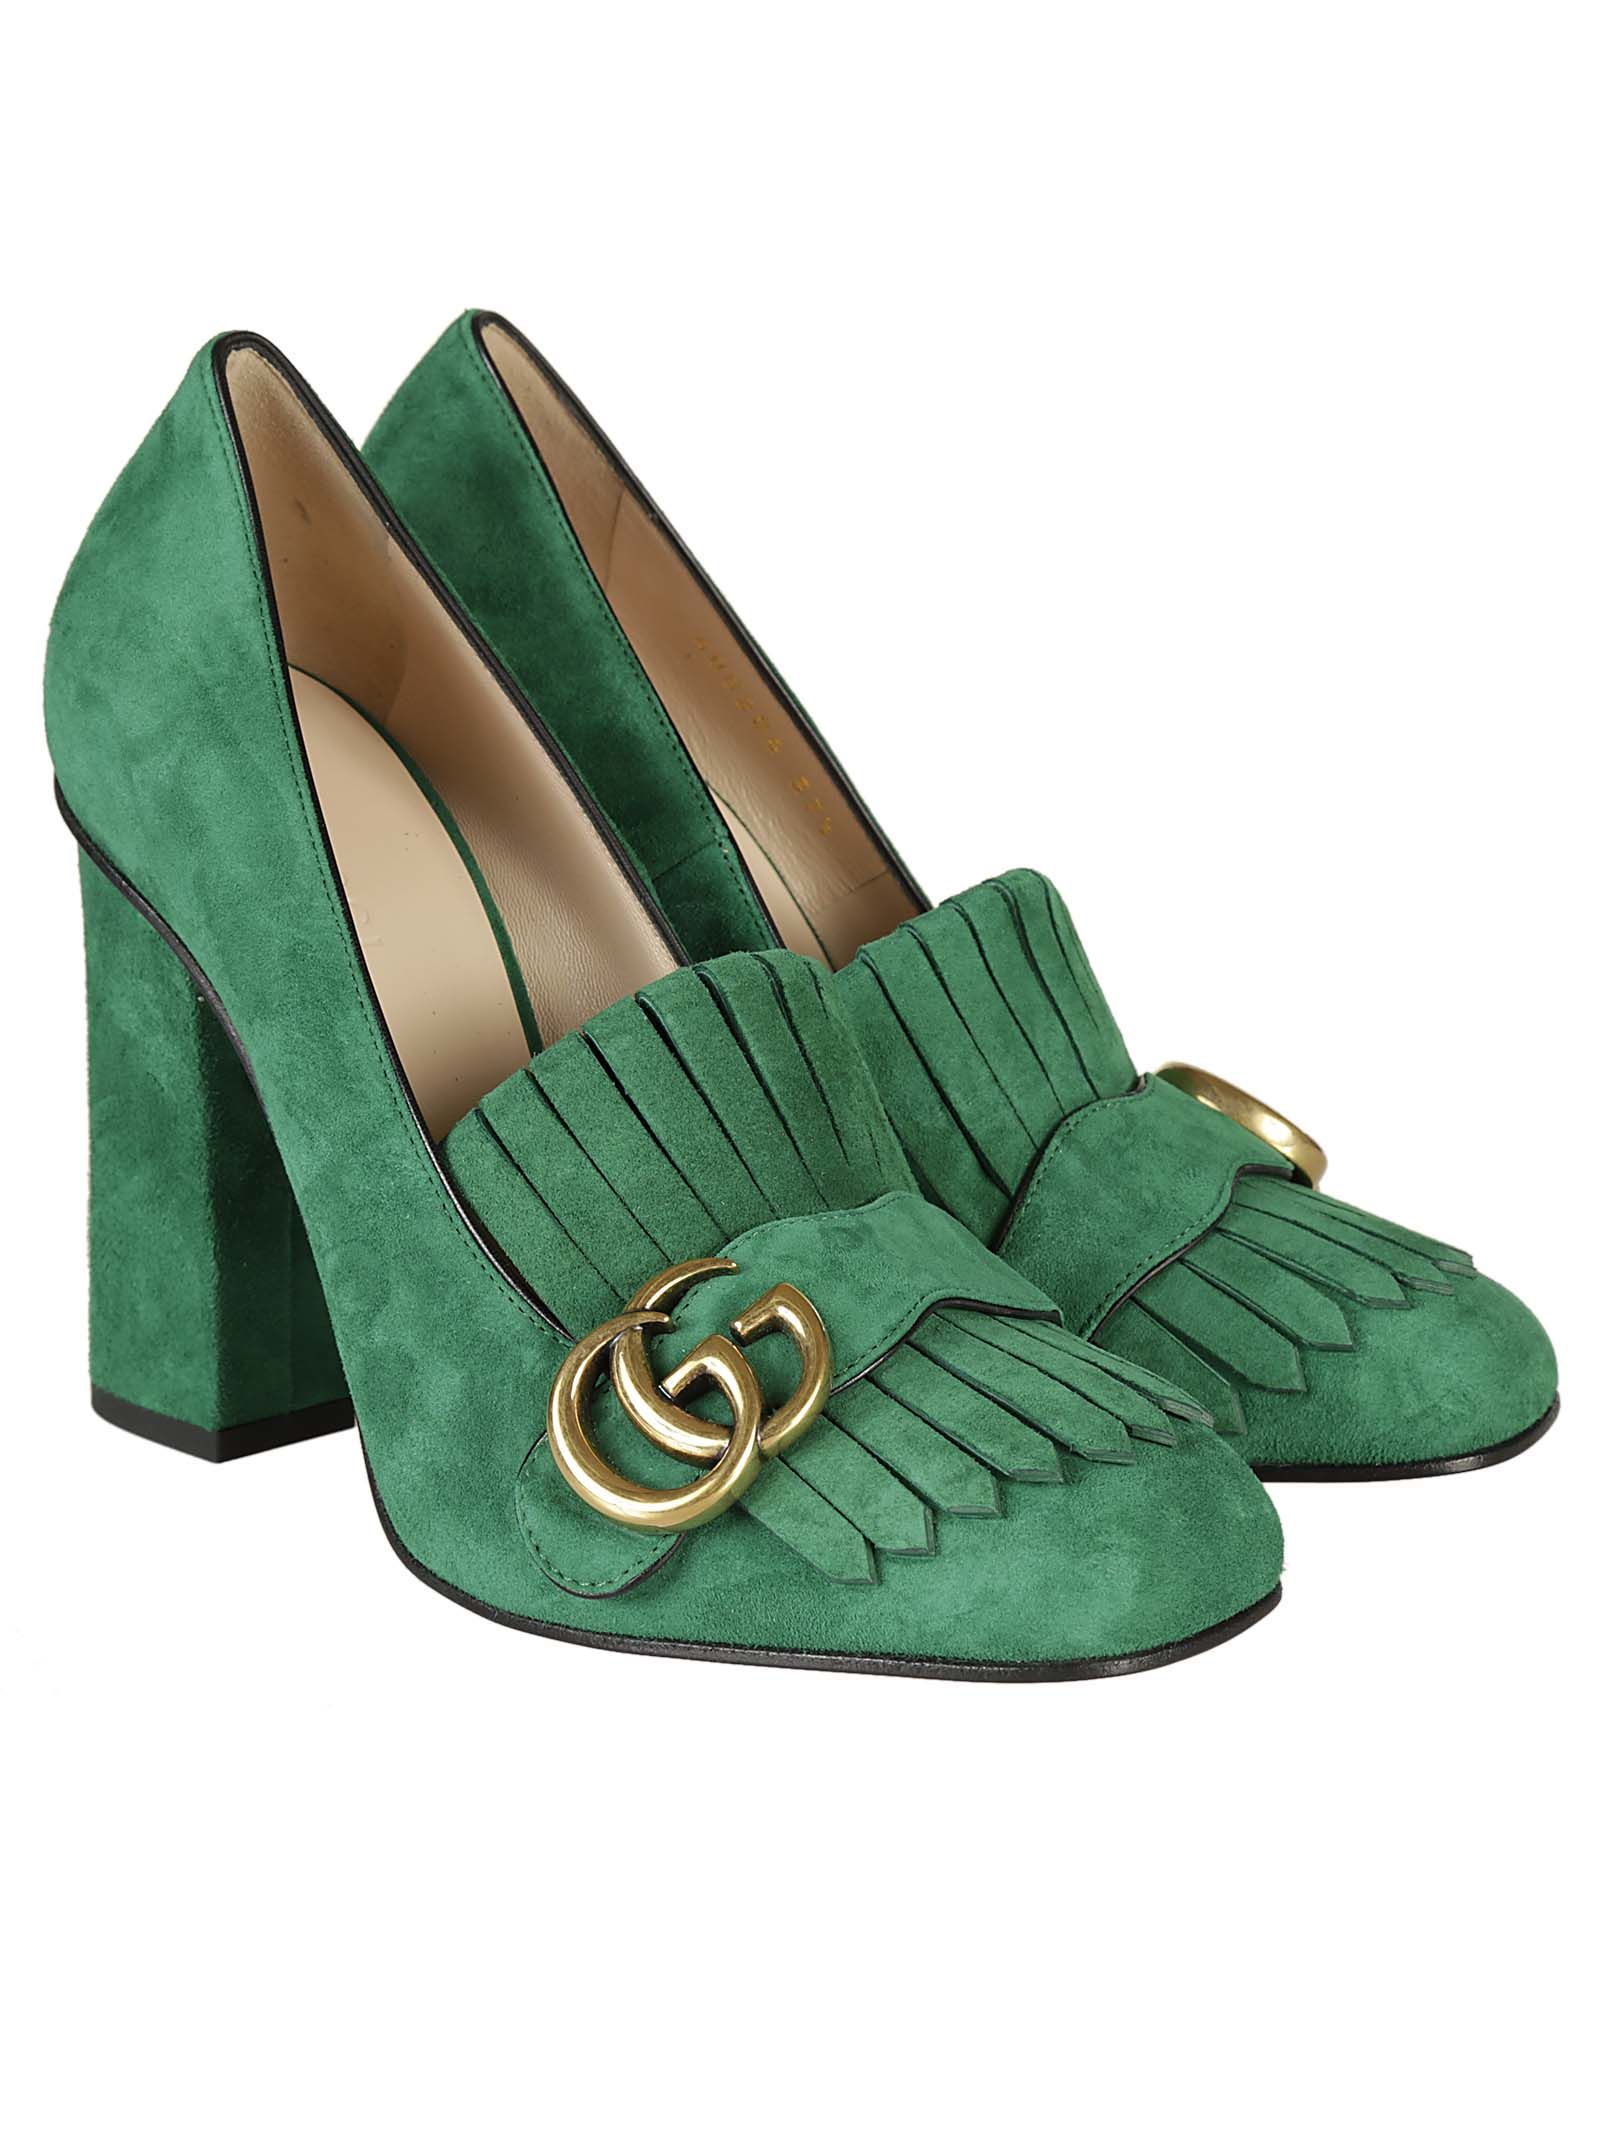 Gucci - Gucci Suede Pumps - Green, Women's High-heeled shoes | Italist